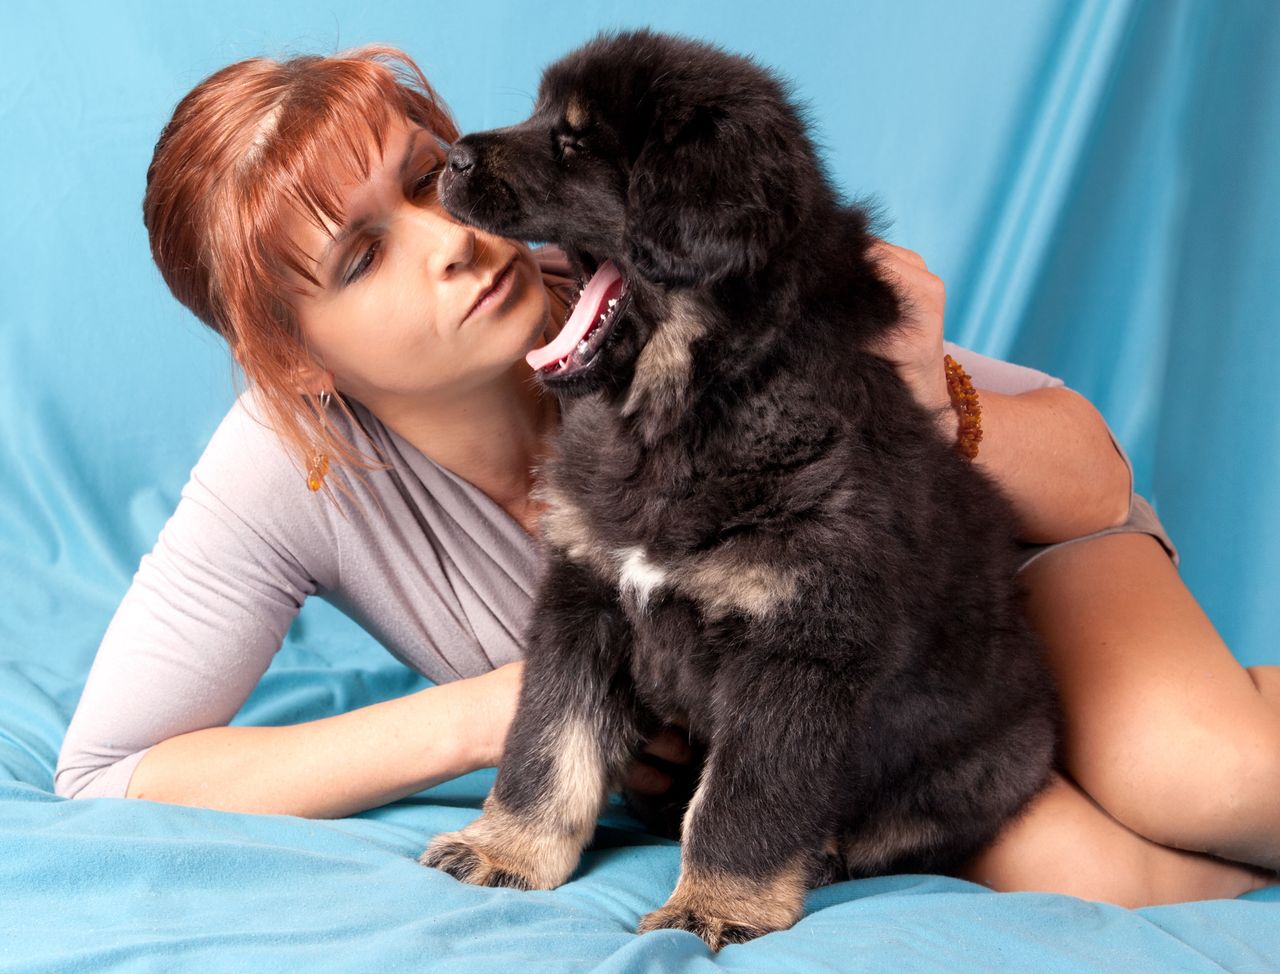 The puppy is clearly stressed by the photo session and the close presence of the model.